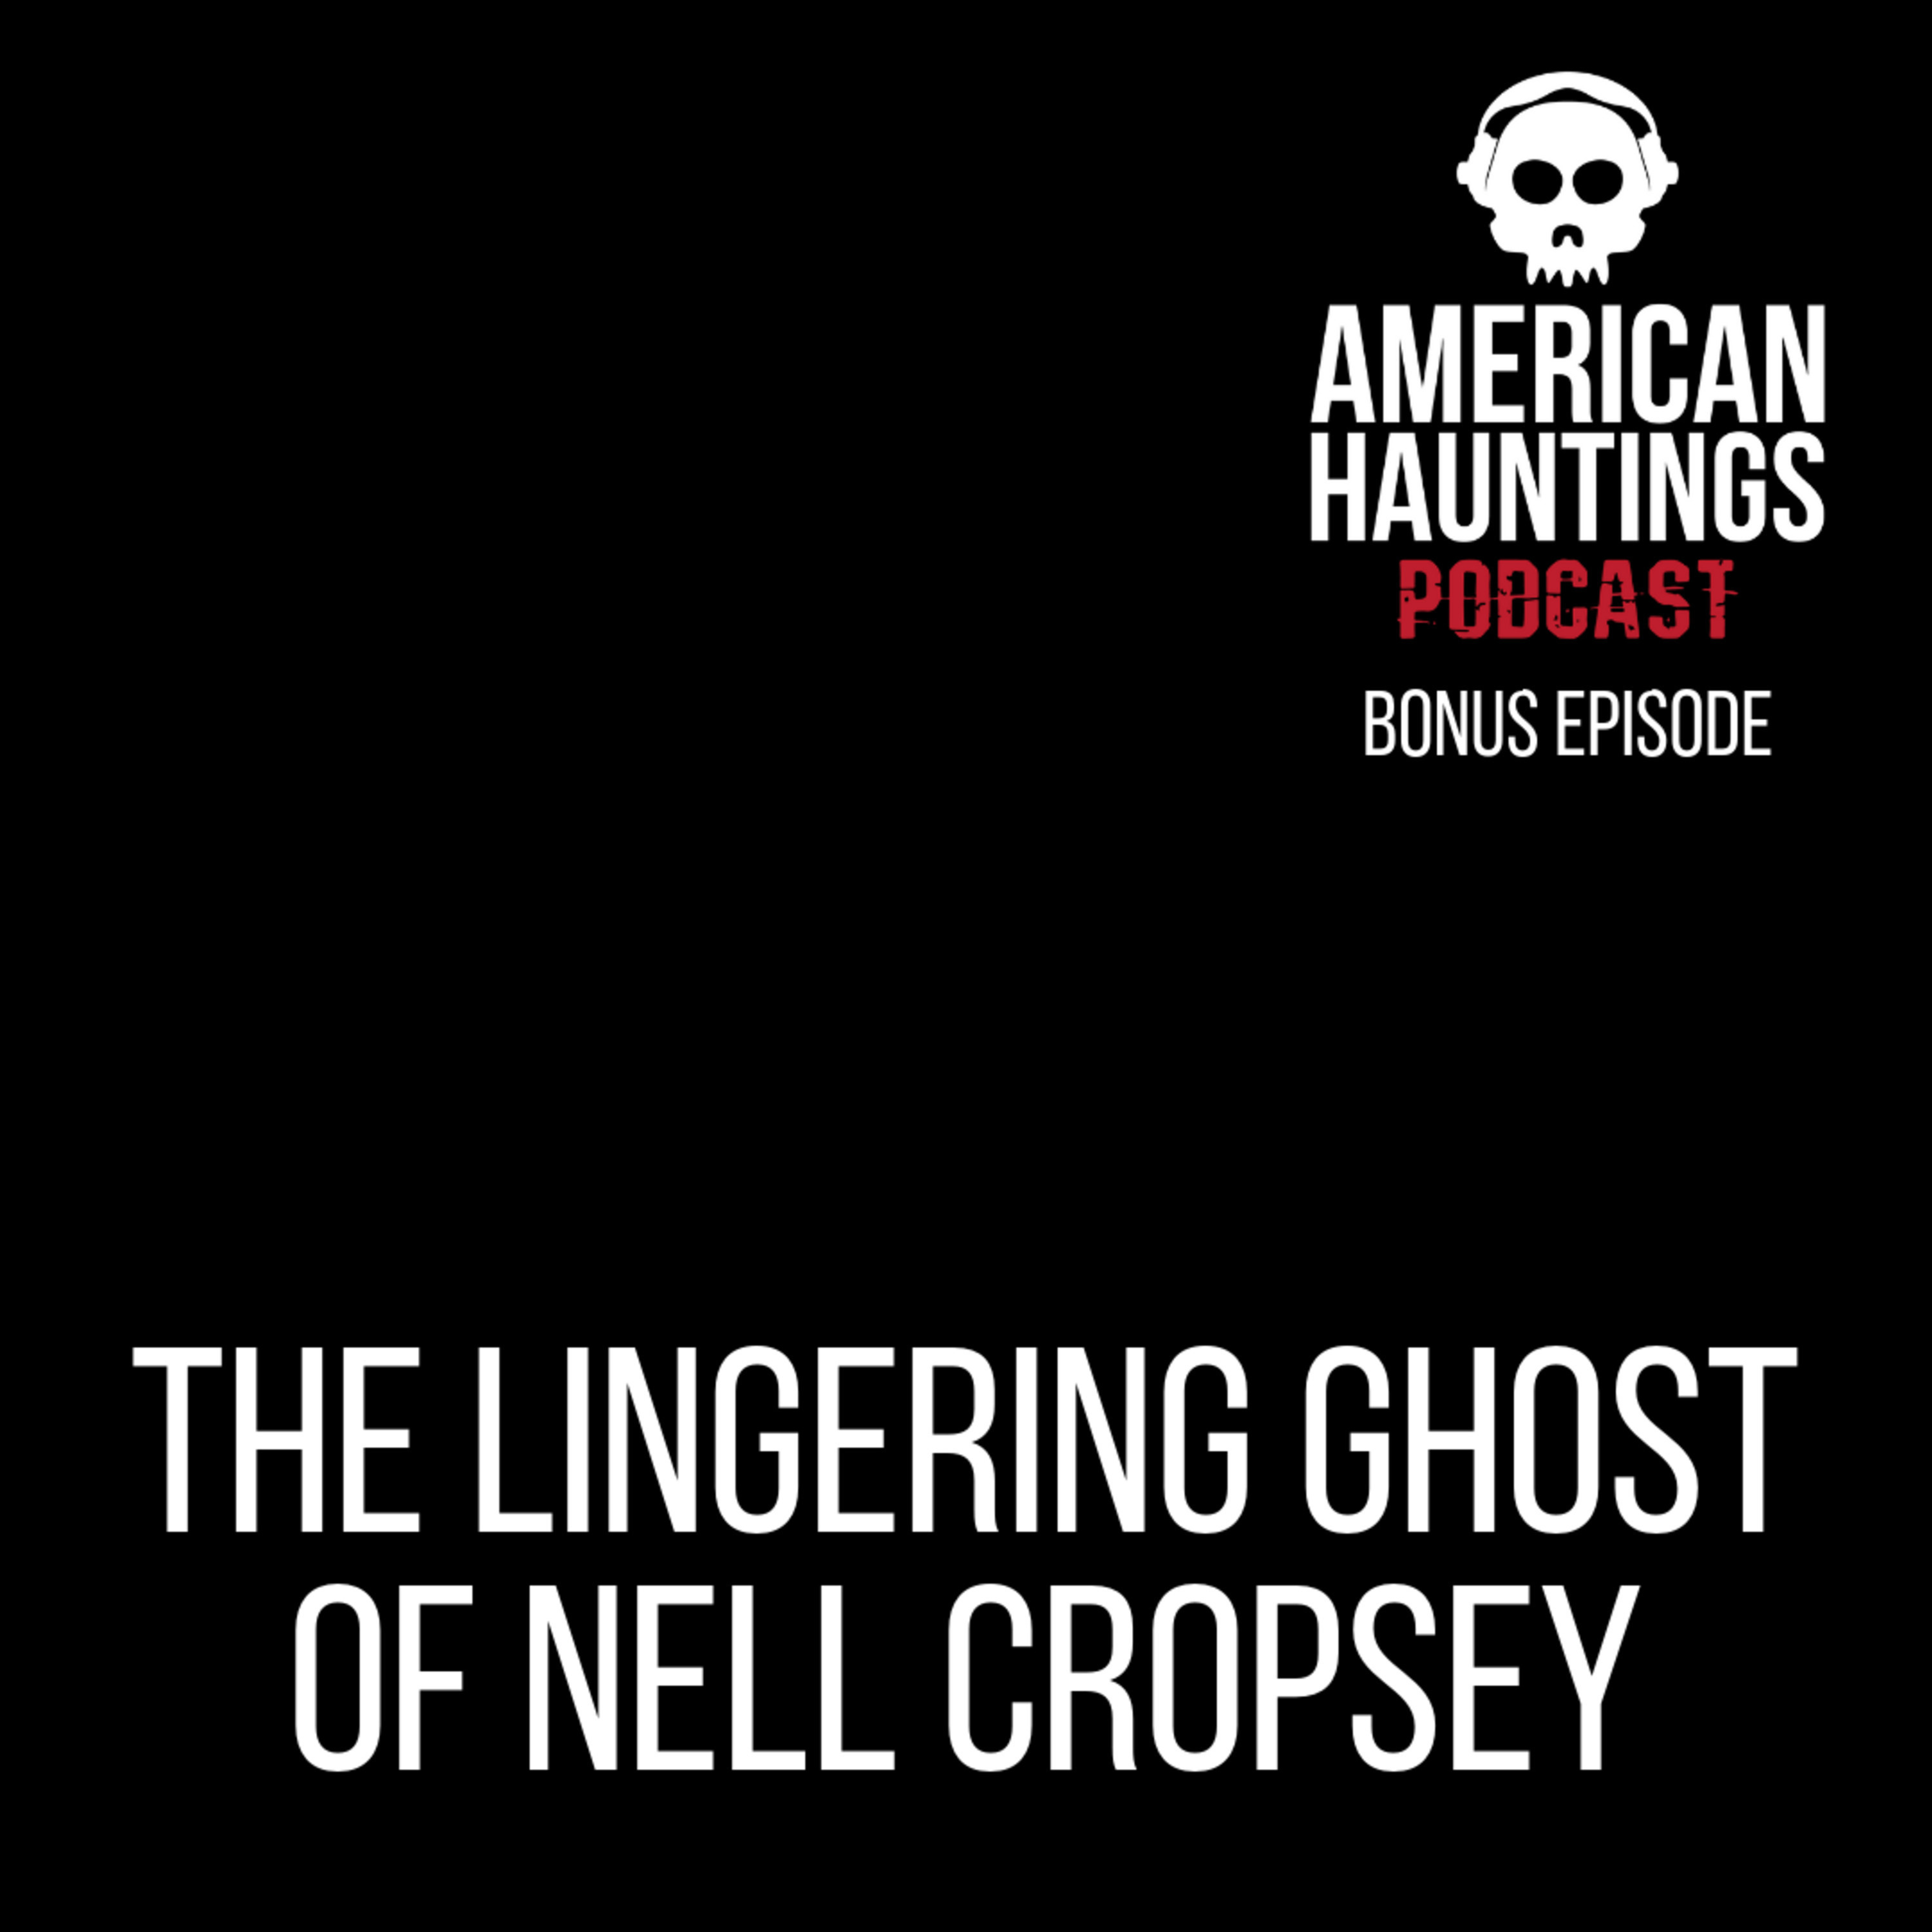 The Lingering Ghost of Nell Cropsey